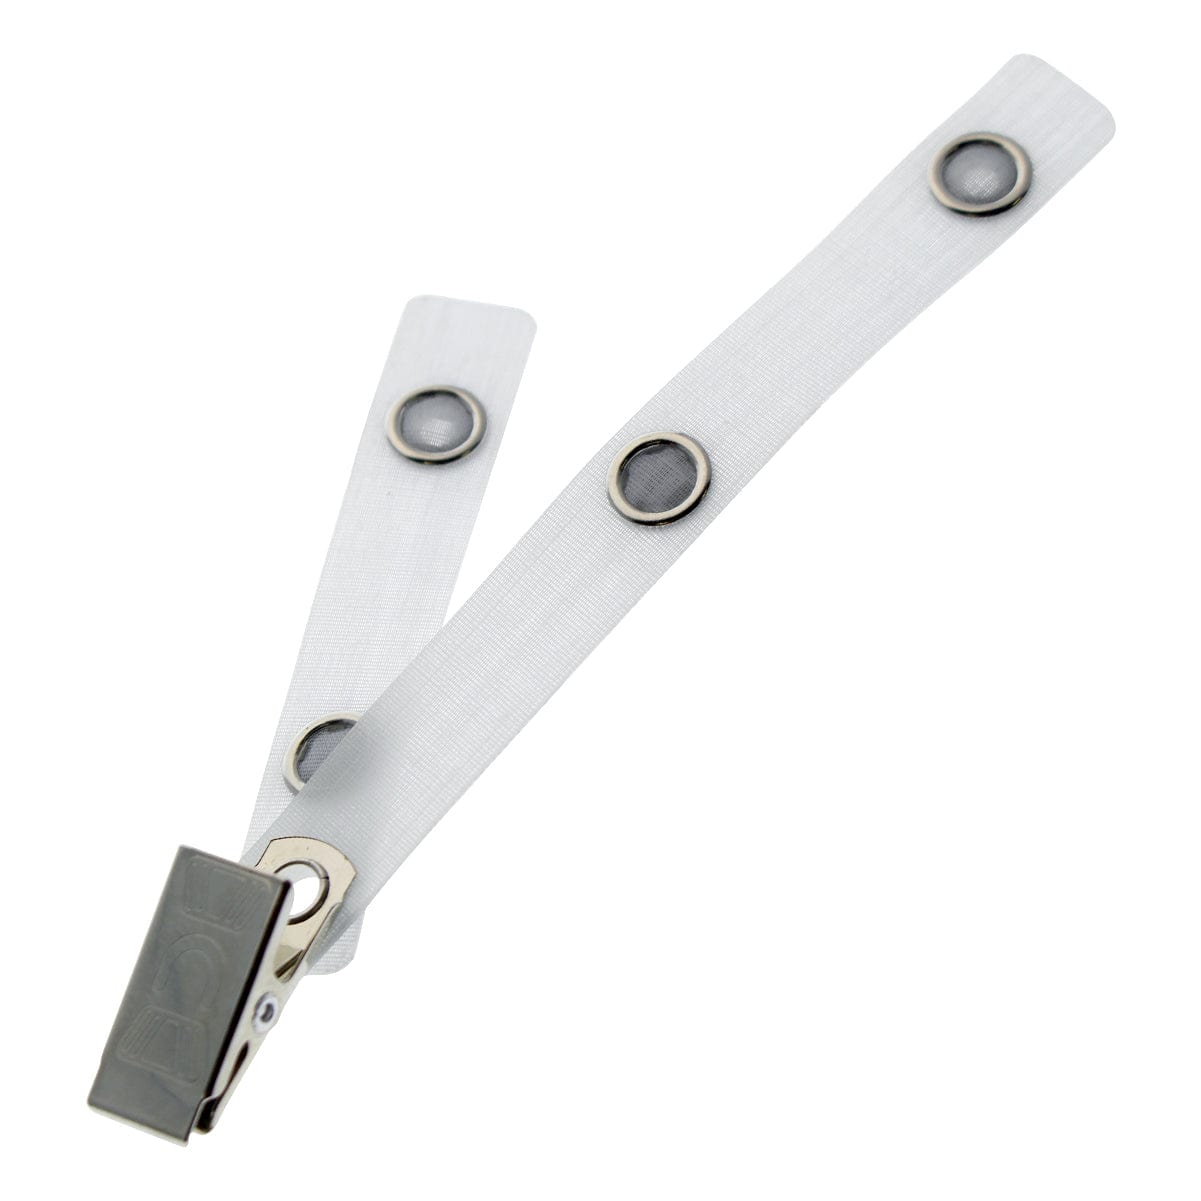 Dual ID Strap Clip for Holding Two ID Badges or Badge Buddy and ID Badge (S2204) S2204